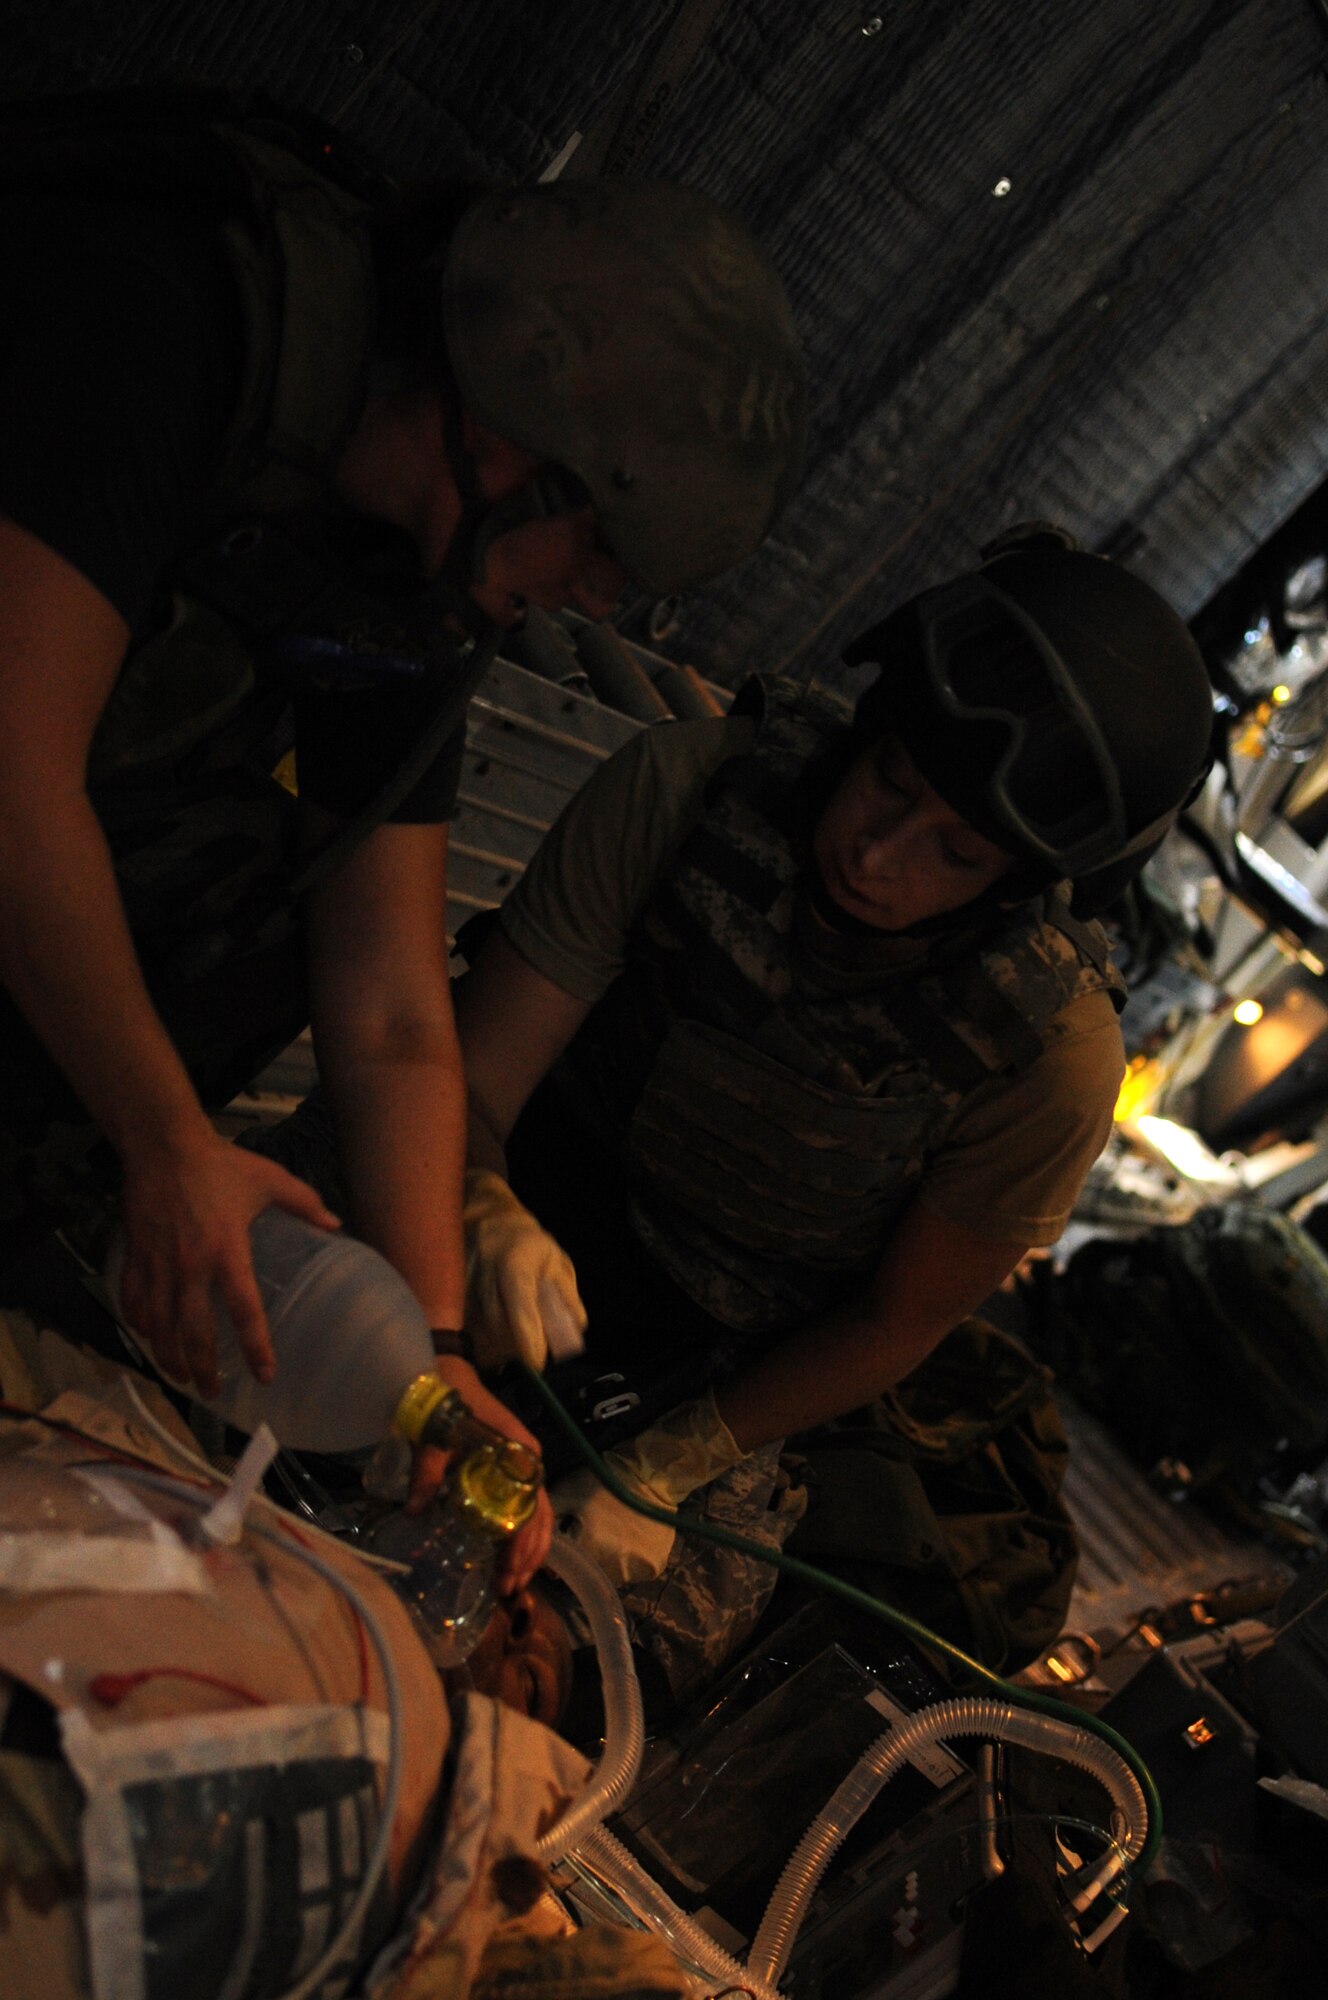 Staff Sgt. Nicole Spickerman(left), 1st Special Operations Support Squadron independent duty medical technician and Casualty Evacuation course student and Capt. Olivia Jackson (right), registered nurse and CASEVAC student from Travis Air Force Base, Calif., assess a simulated patient onboard an MC-130 assigned to the 6th Special Operations Squadron Aug. 9. The two week CASEVAC course, conducted by the Tactical Operations Medical Skills Center, trains special operations medical forces to retrieve, treat and transport wounded servicemembers through any means possible. (DoD photo by Air Force Airman Caitlin O'Neil-McKeown)